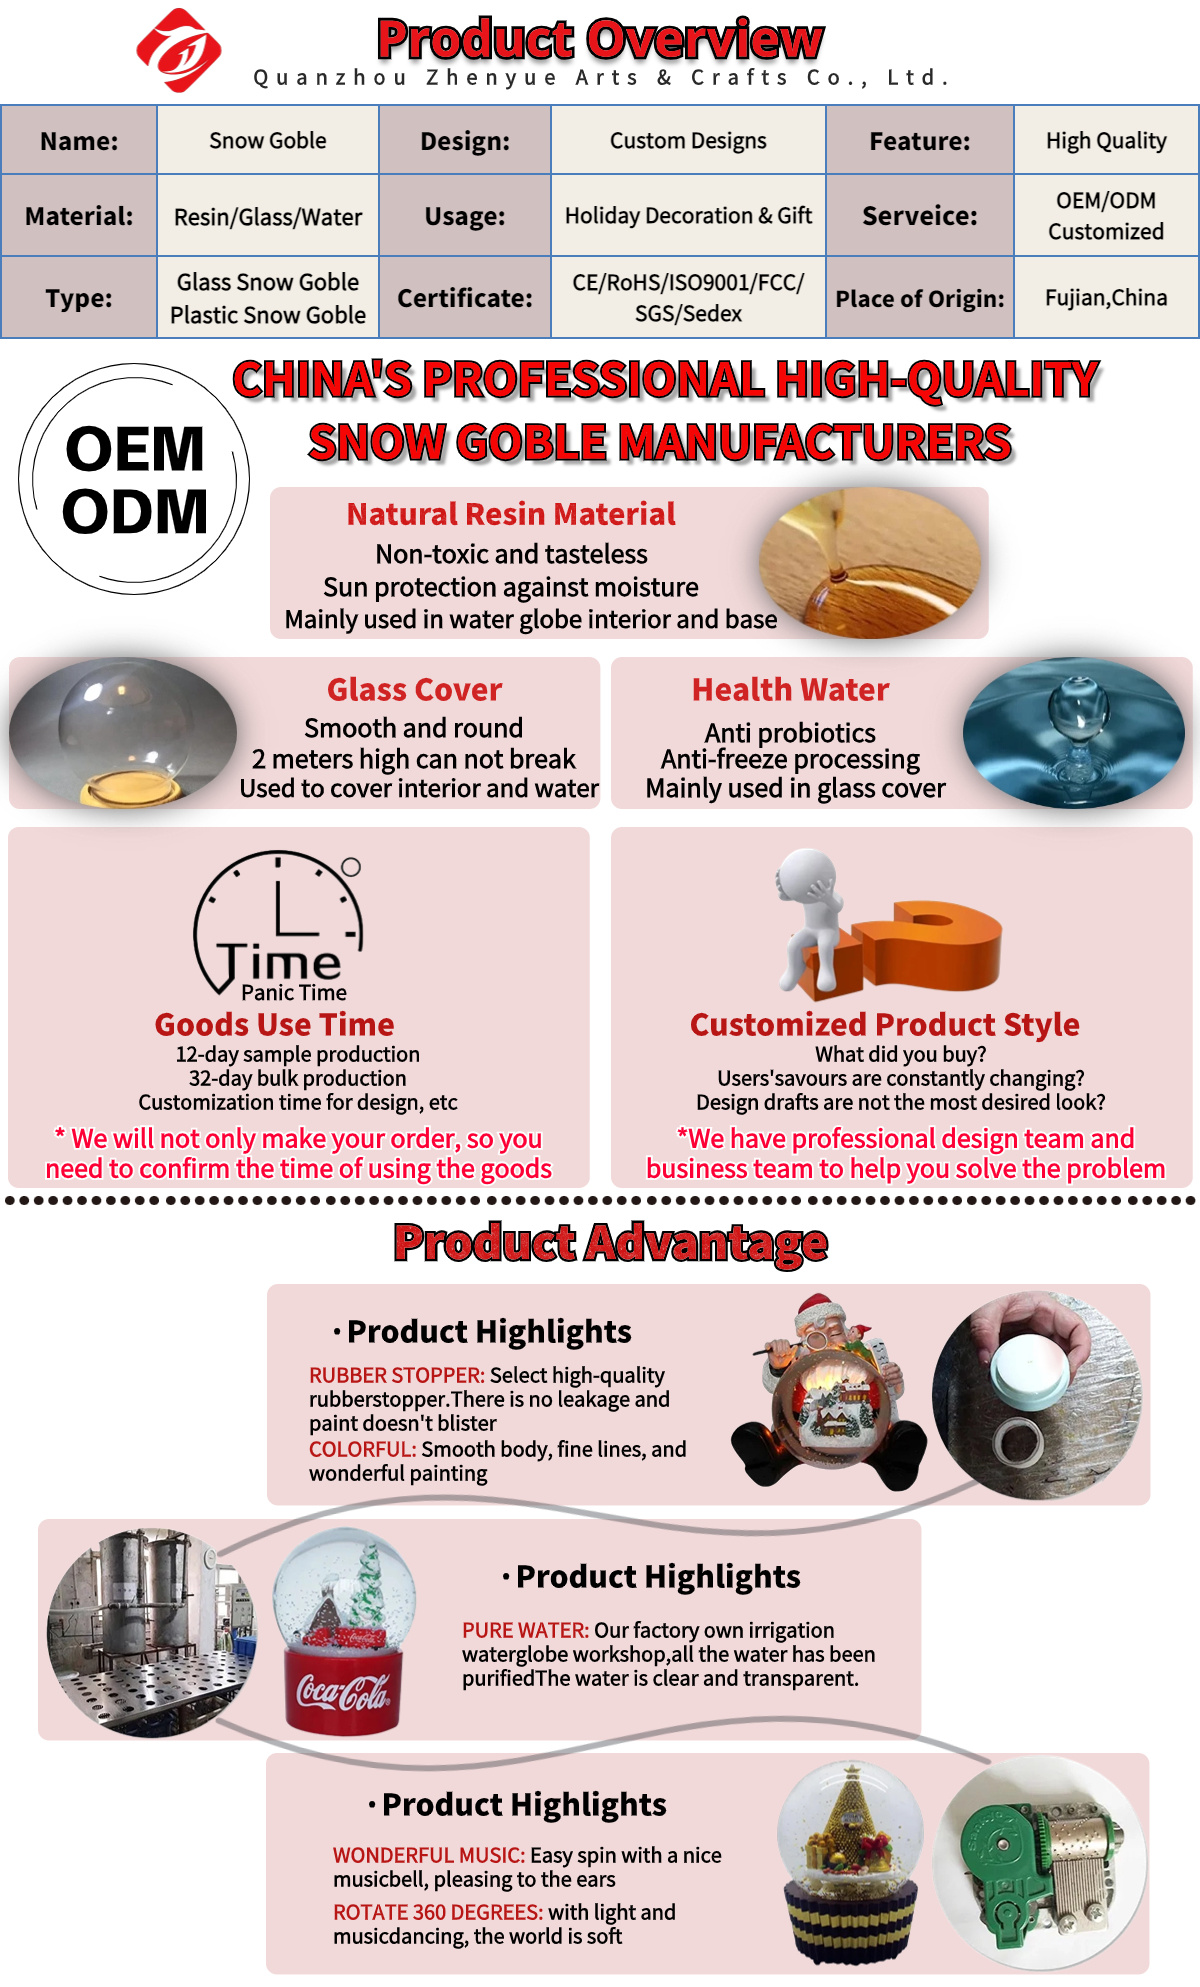 snow globe manufacturer product overview